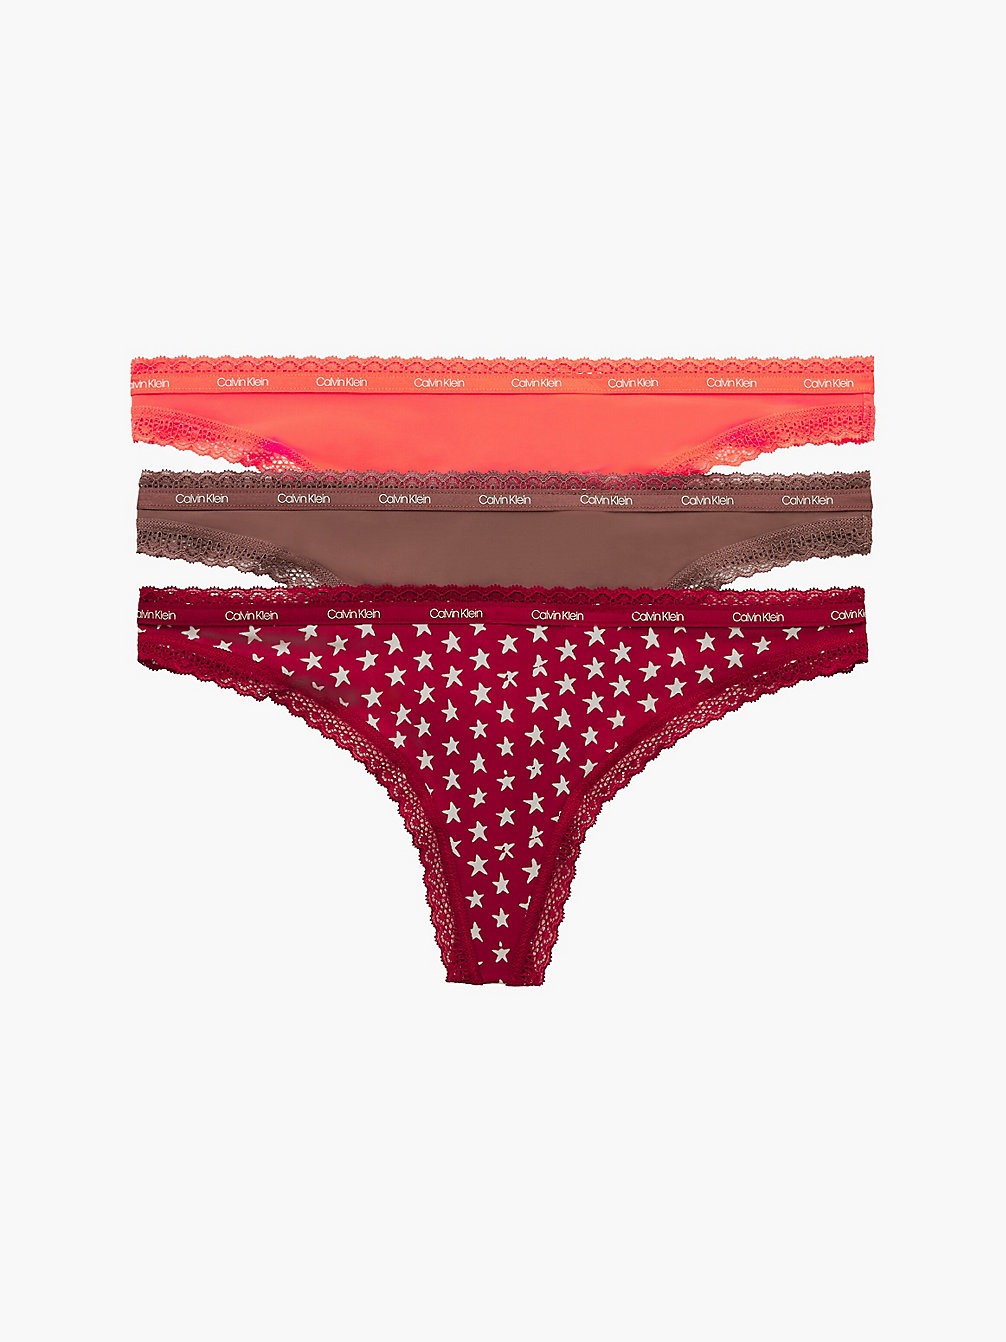 Perizoma In Confezione Da 3 - Bottoms Up > STAR STAMP_RED/BURNT EMBERS/CAMEL > undefined donna > Calvin Klein